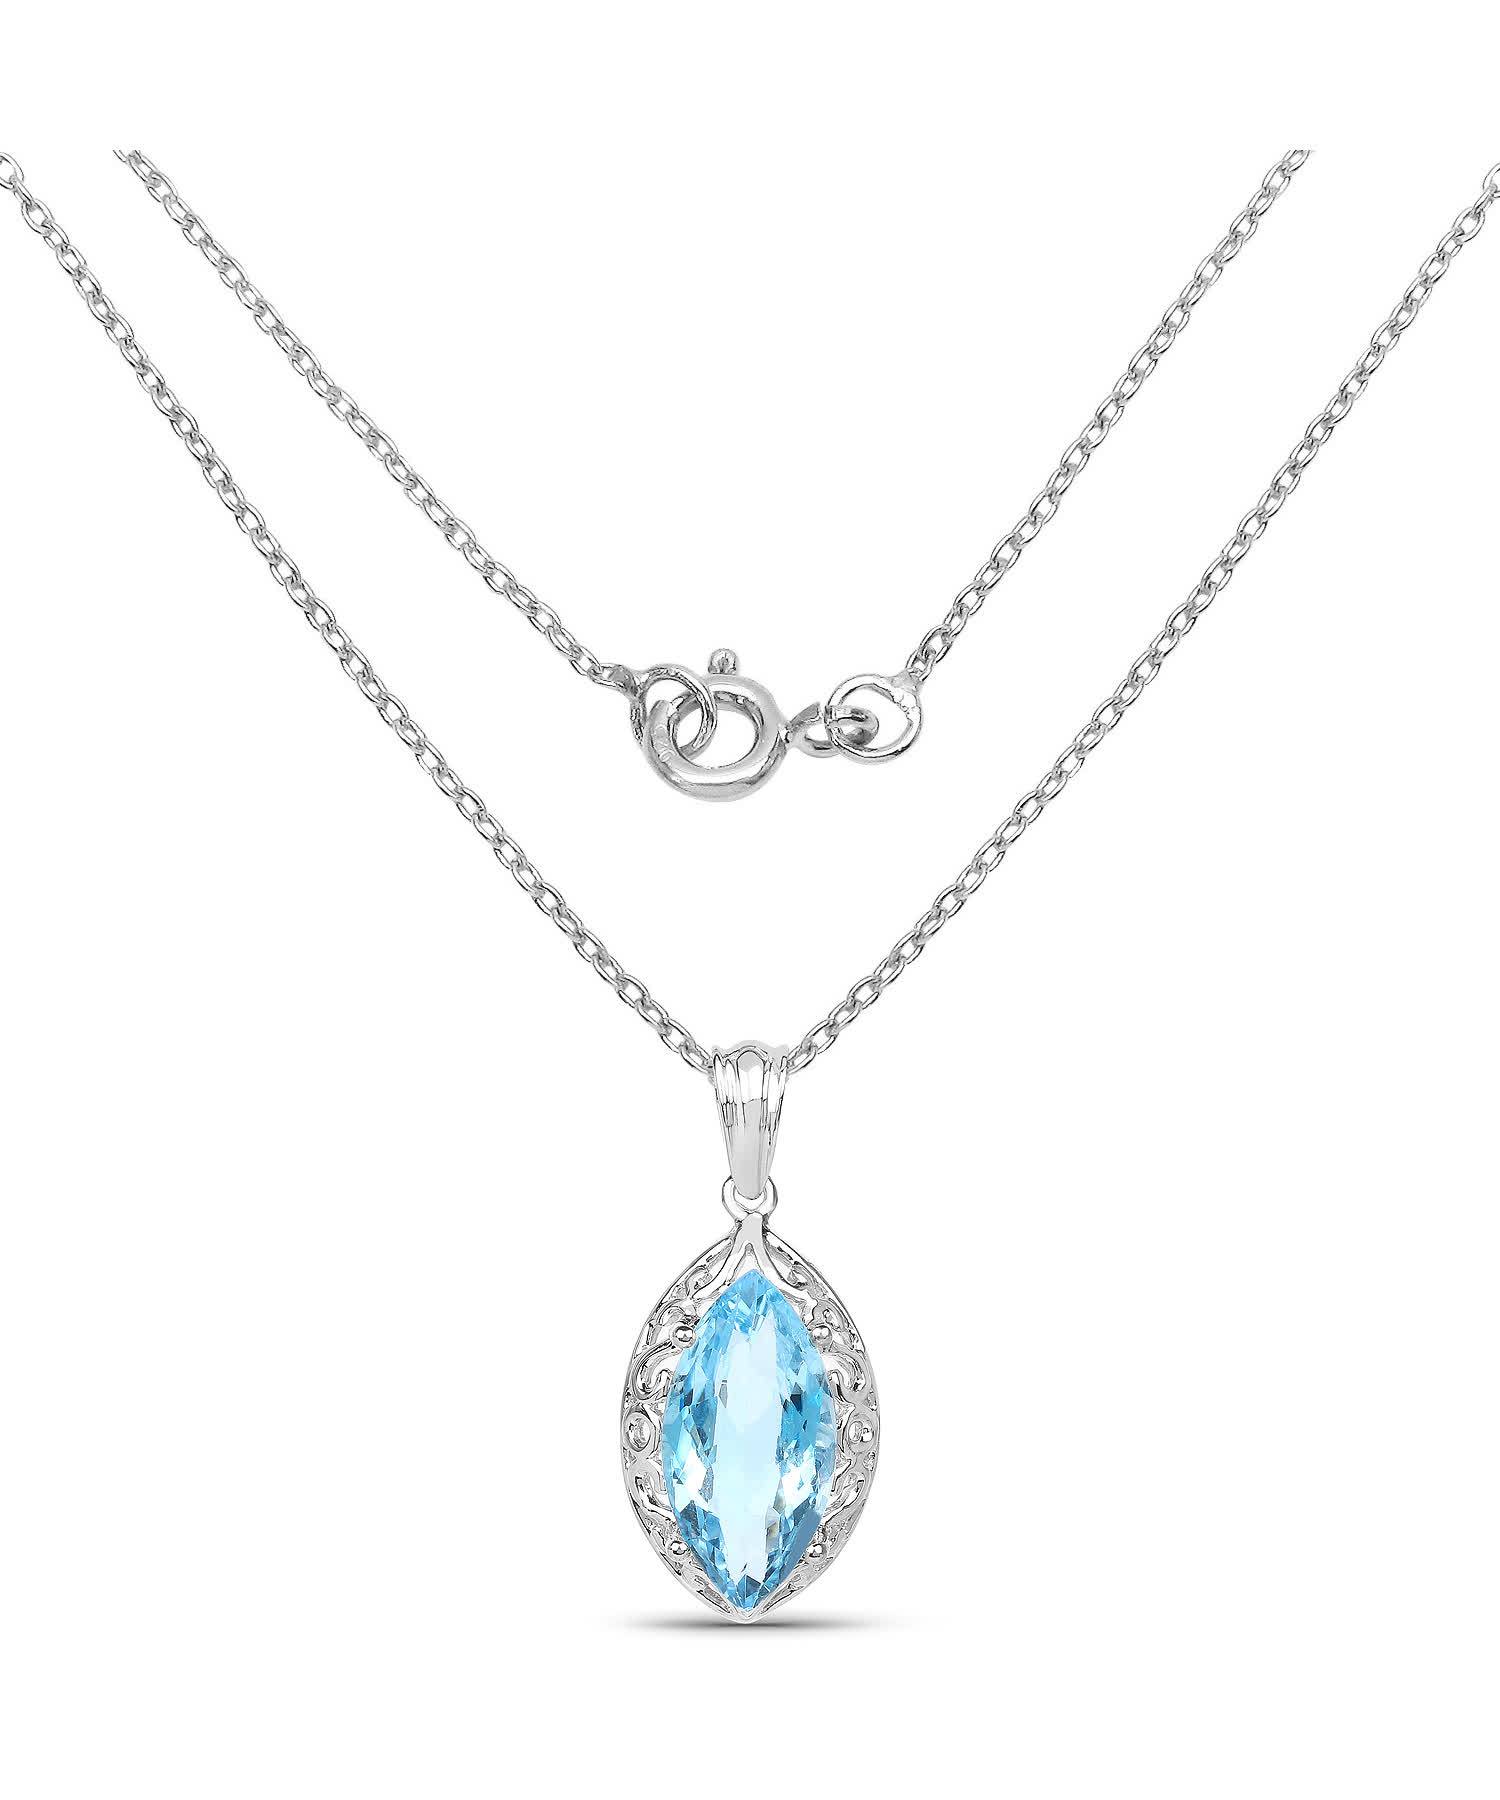 8.22ctw Natural Swiss Blue Topaz Rhodium Plated 925 Sterling Silver Marquise Pendant With Chain View 2